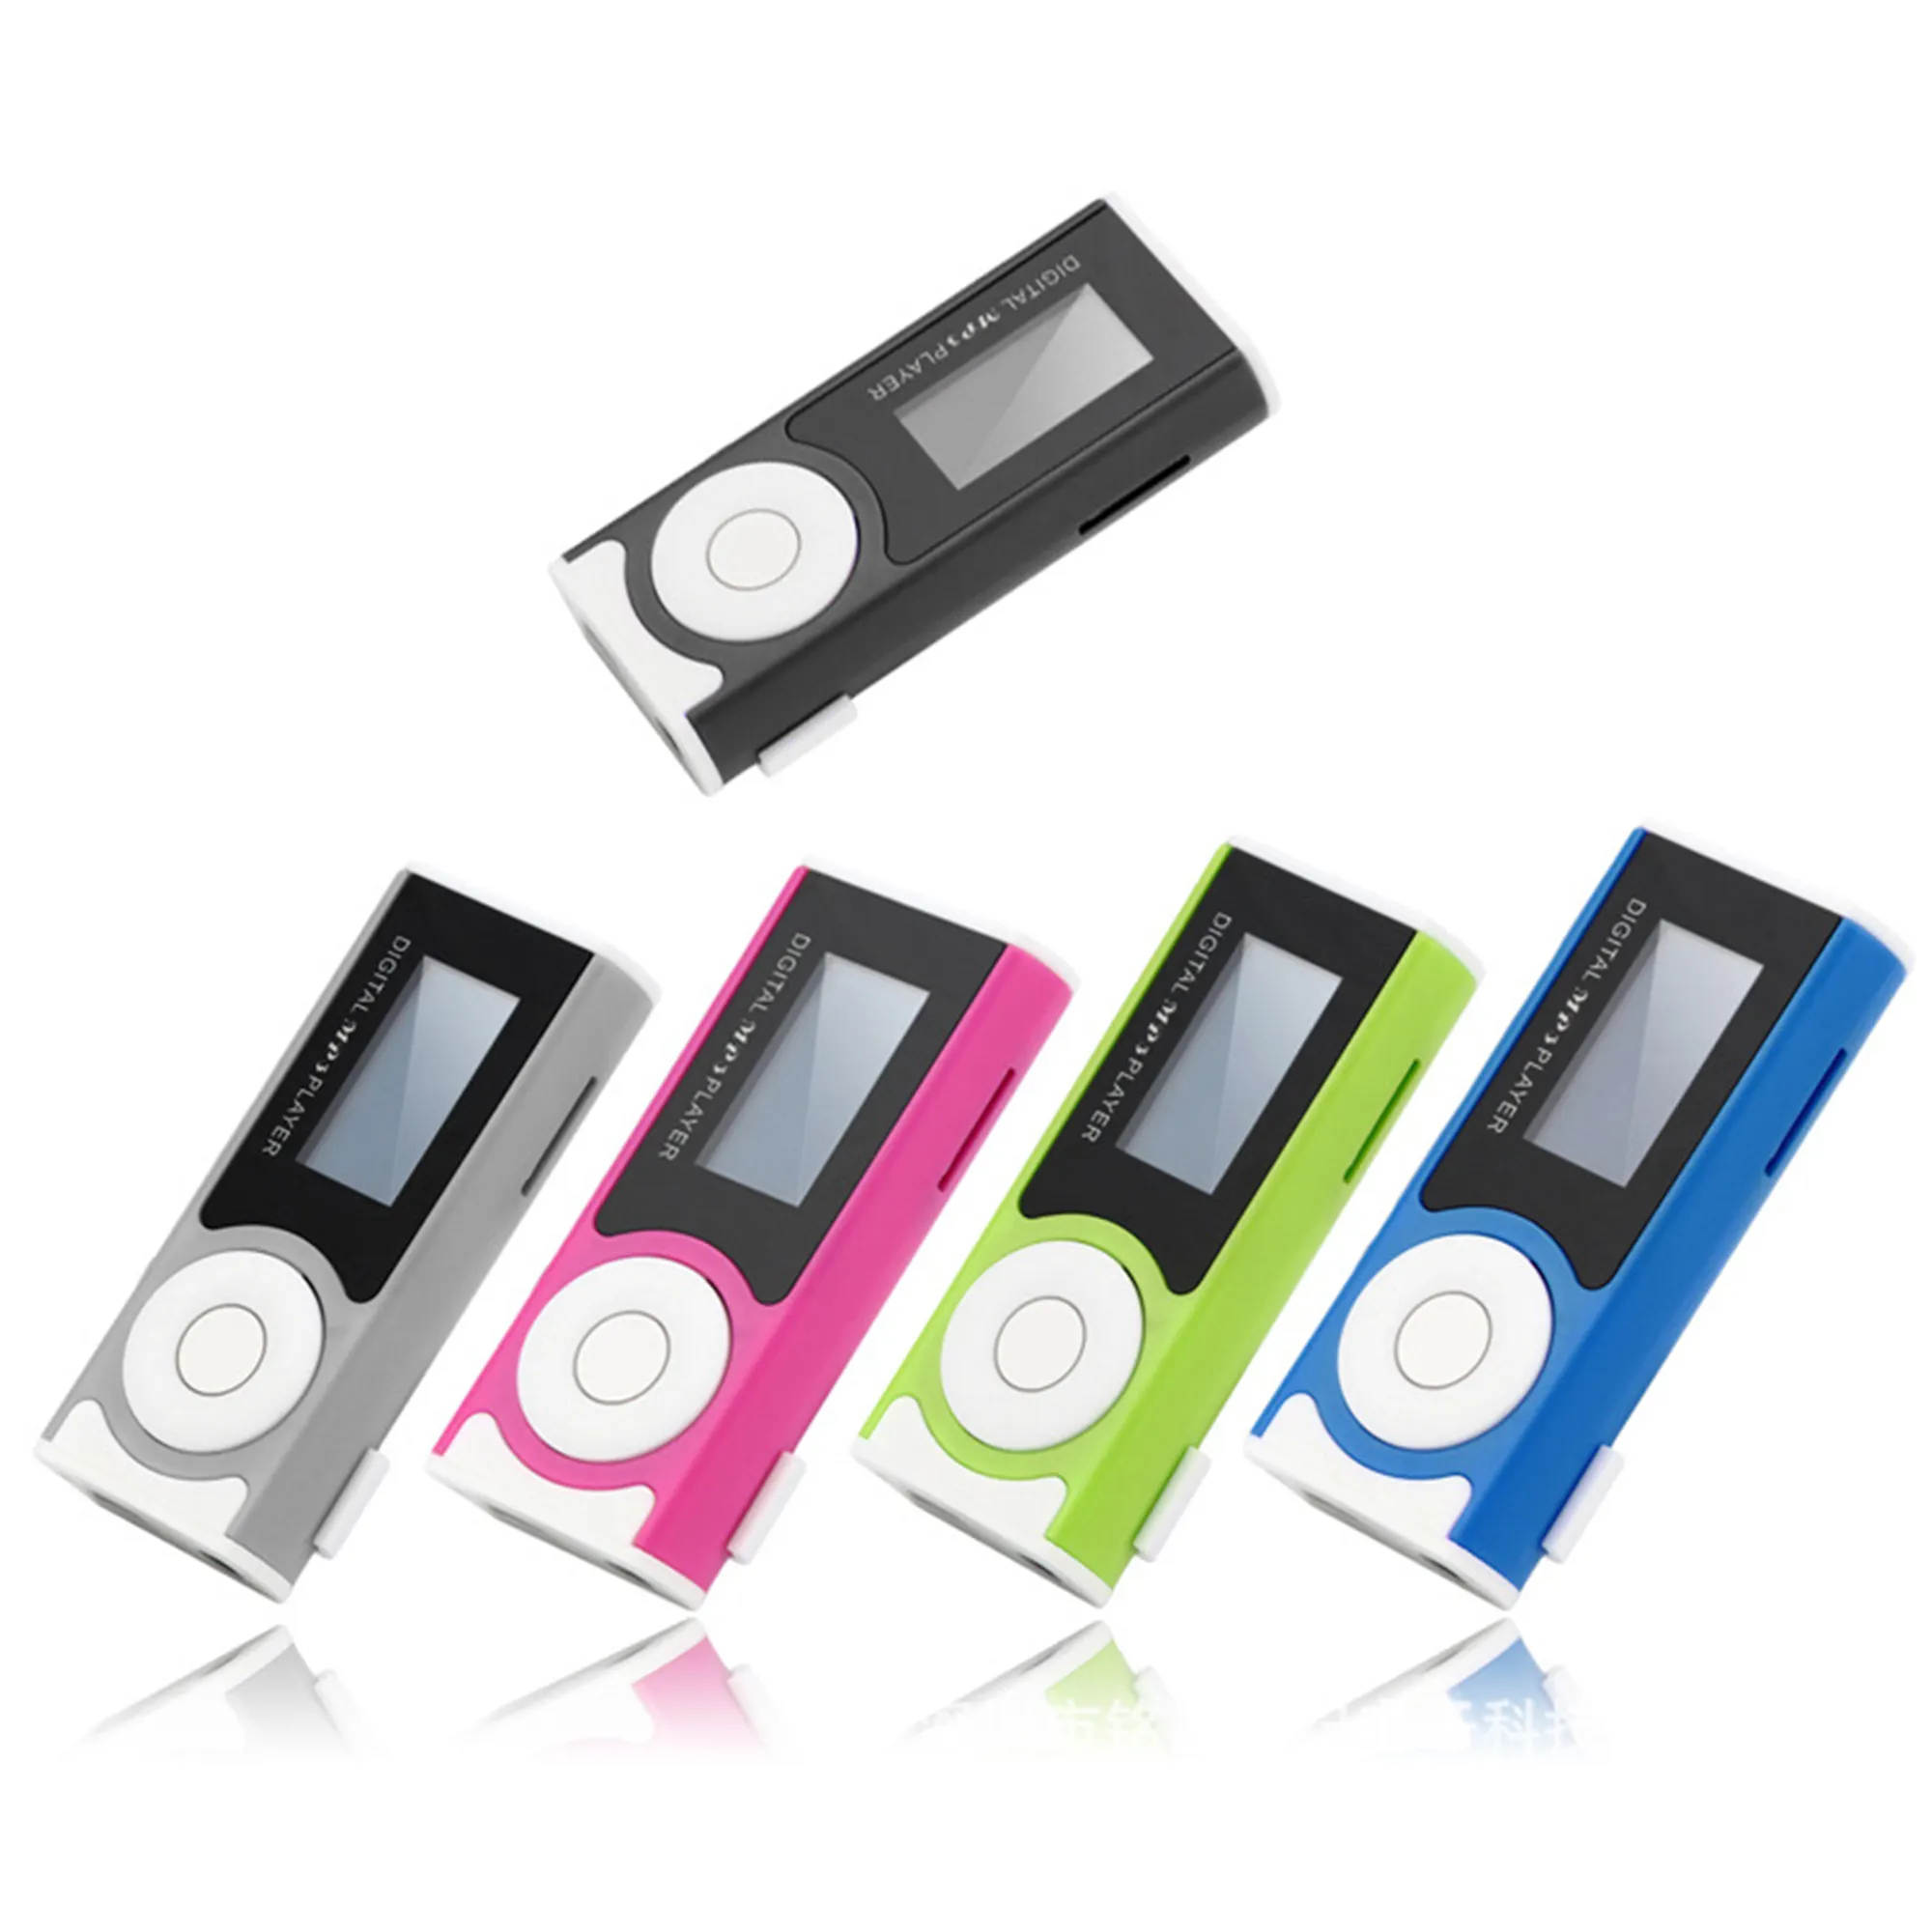 Hot Selling 4 In 1 Led Light Mp3 Player Mini Clip Mp3 Player With Lcd Screen